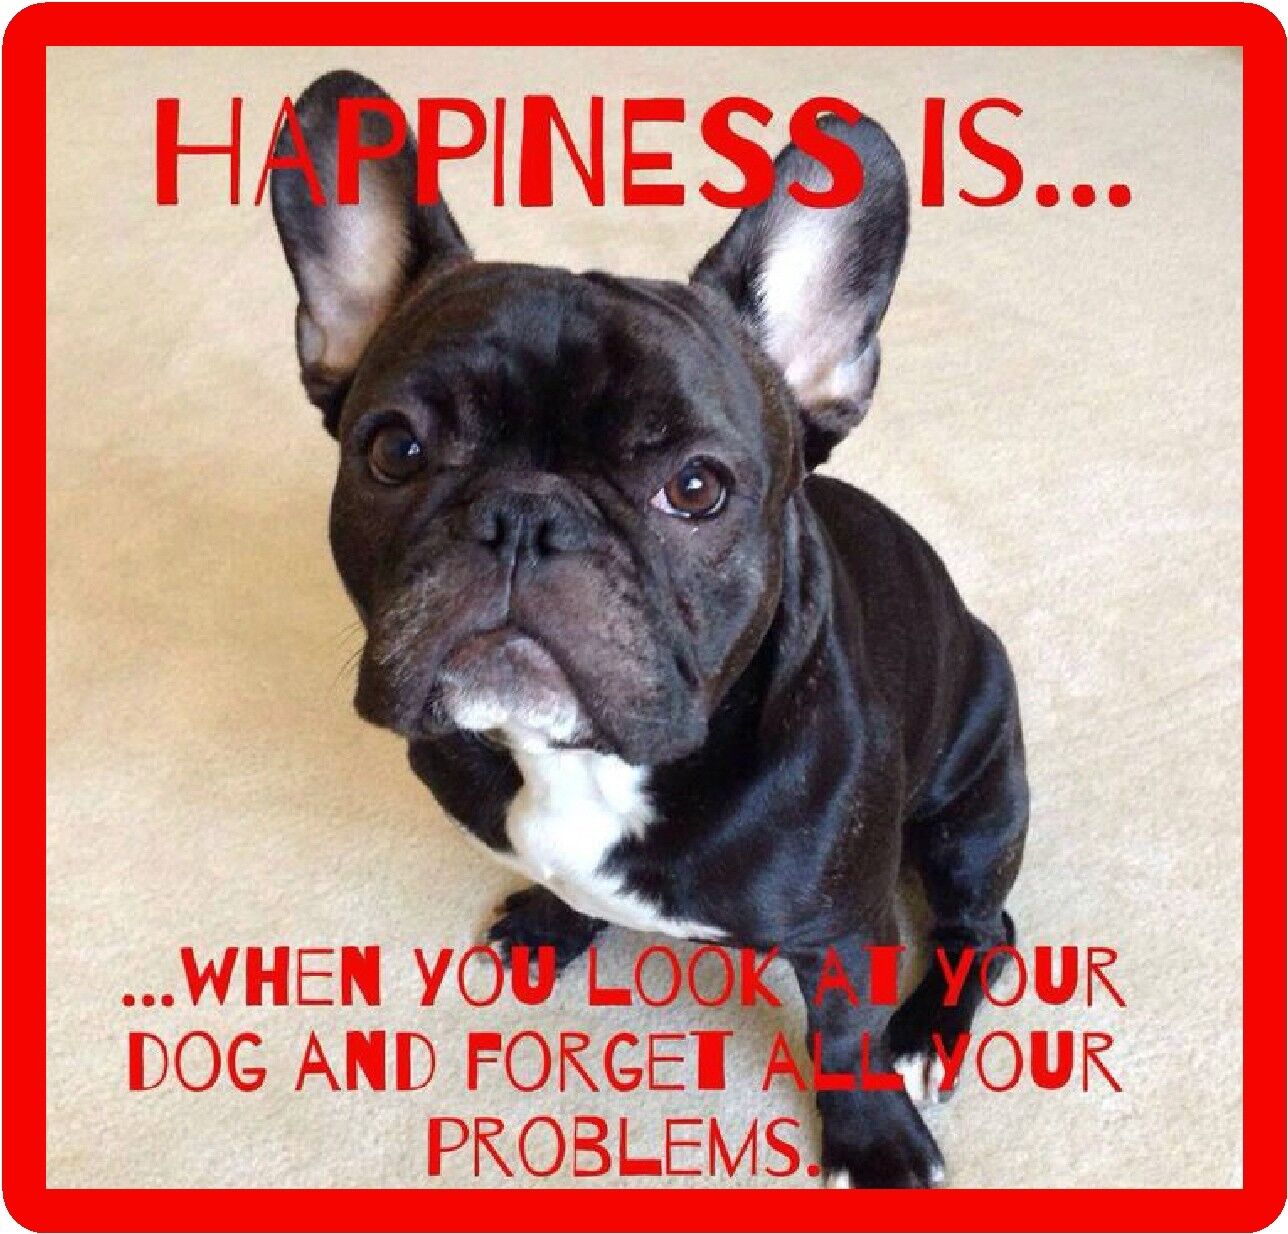 French Bull Dog Happiness Refrigerator / Tool Box  Magnet Gift Card Insert